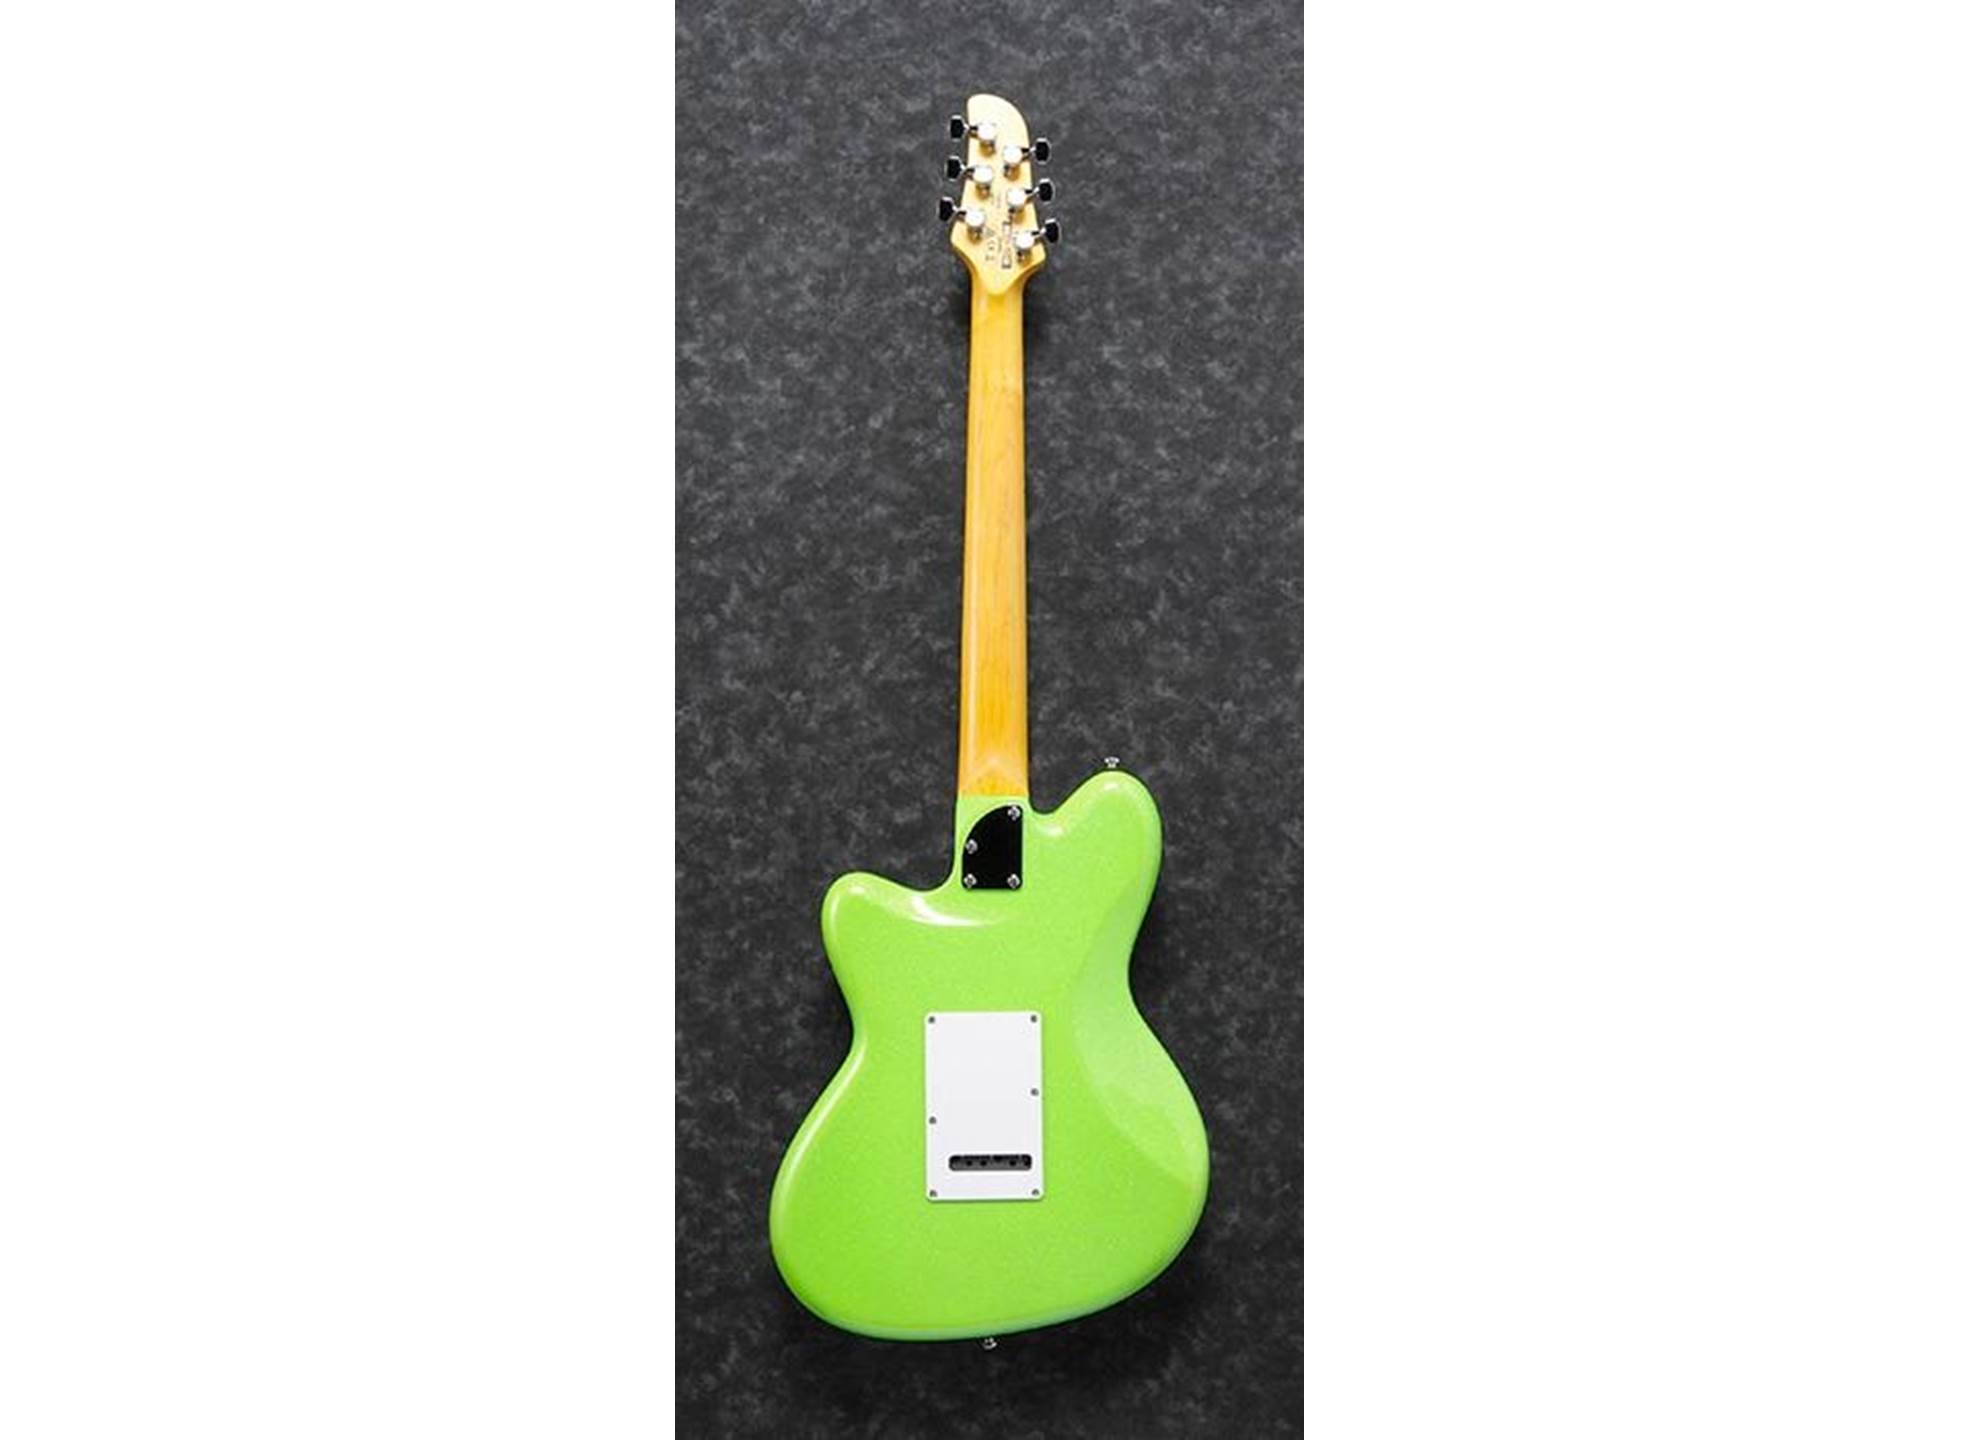 YY10-SGS Slime Green Sparkle Yvette Young Signature